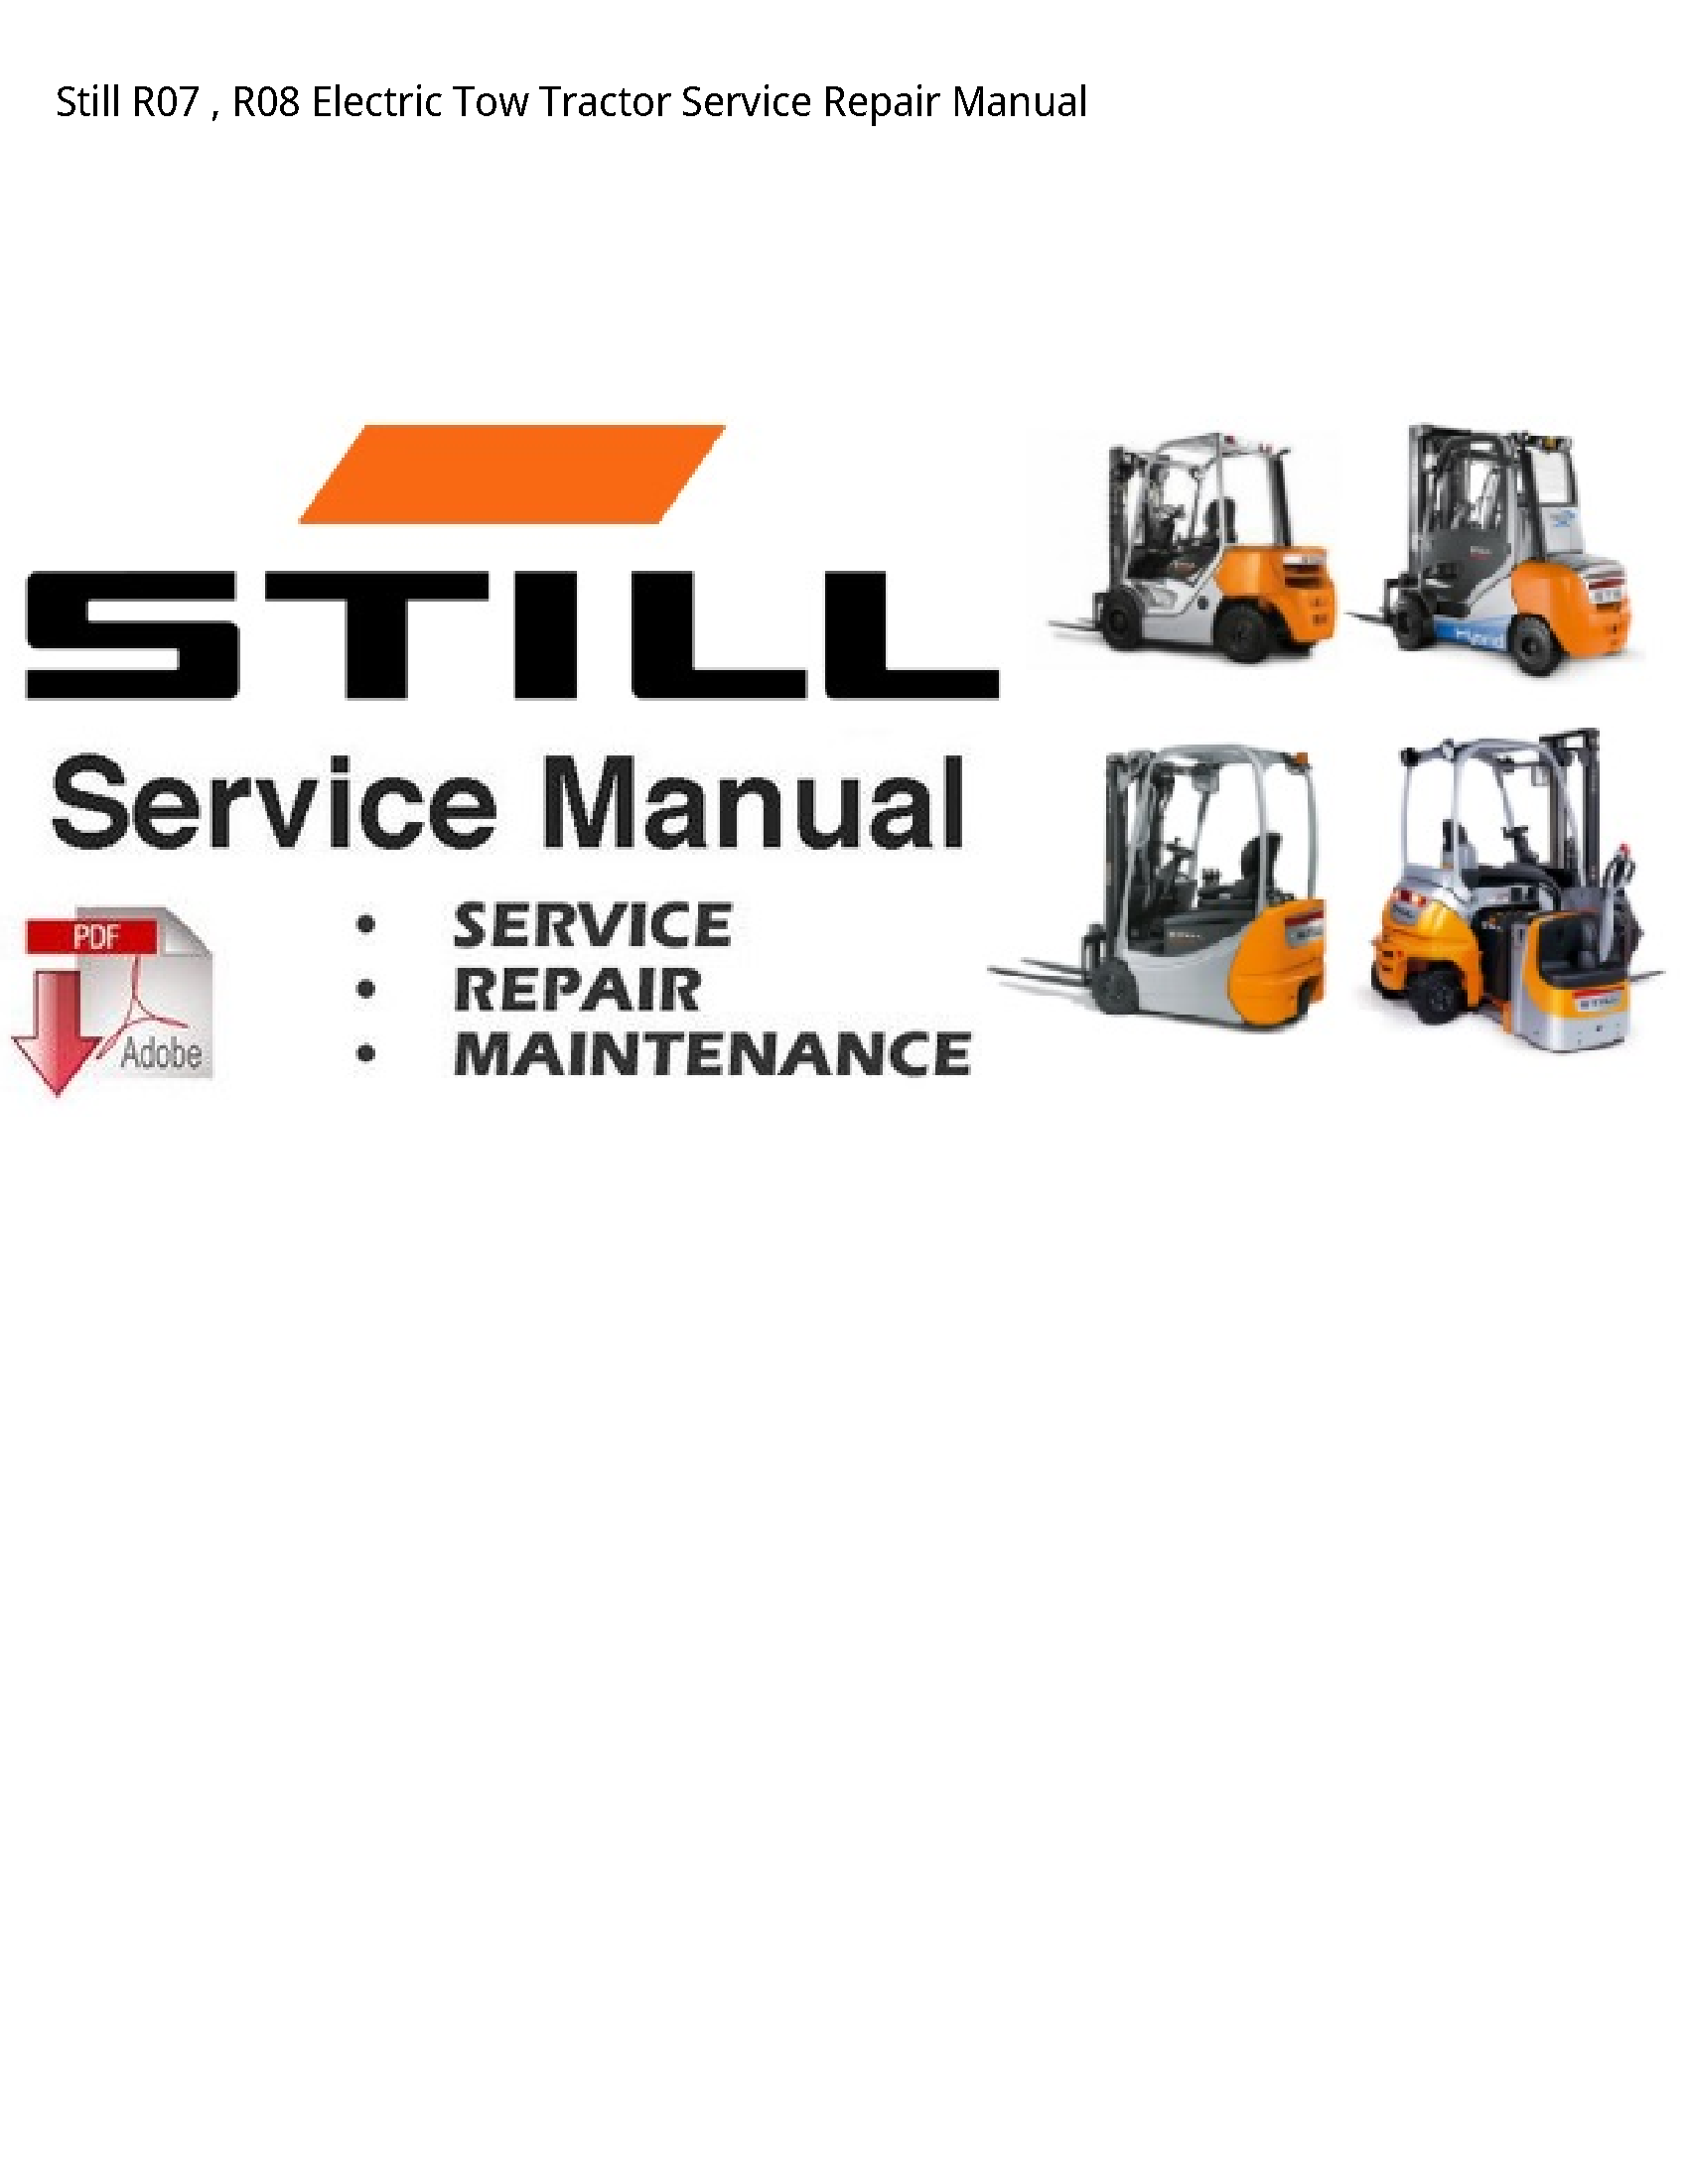 Still R07 Electric Tow Tractor manual